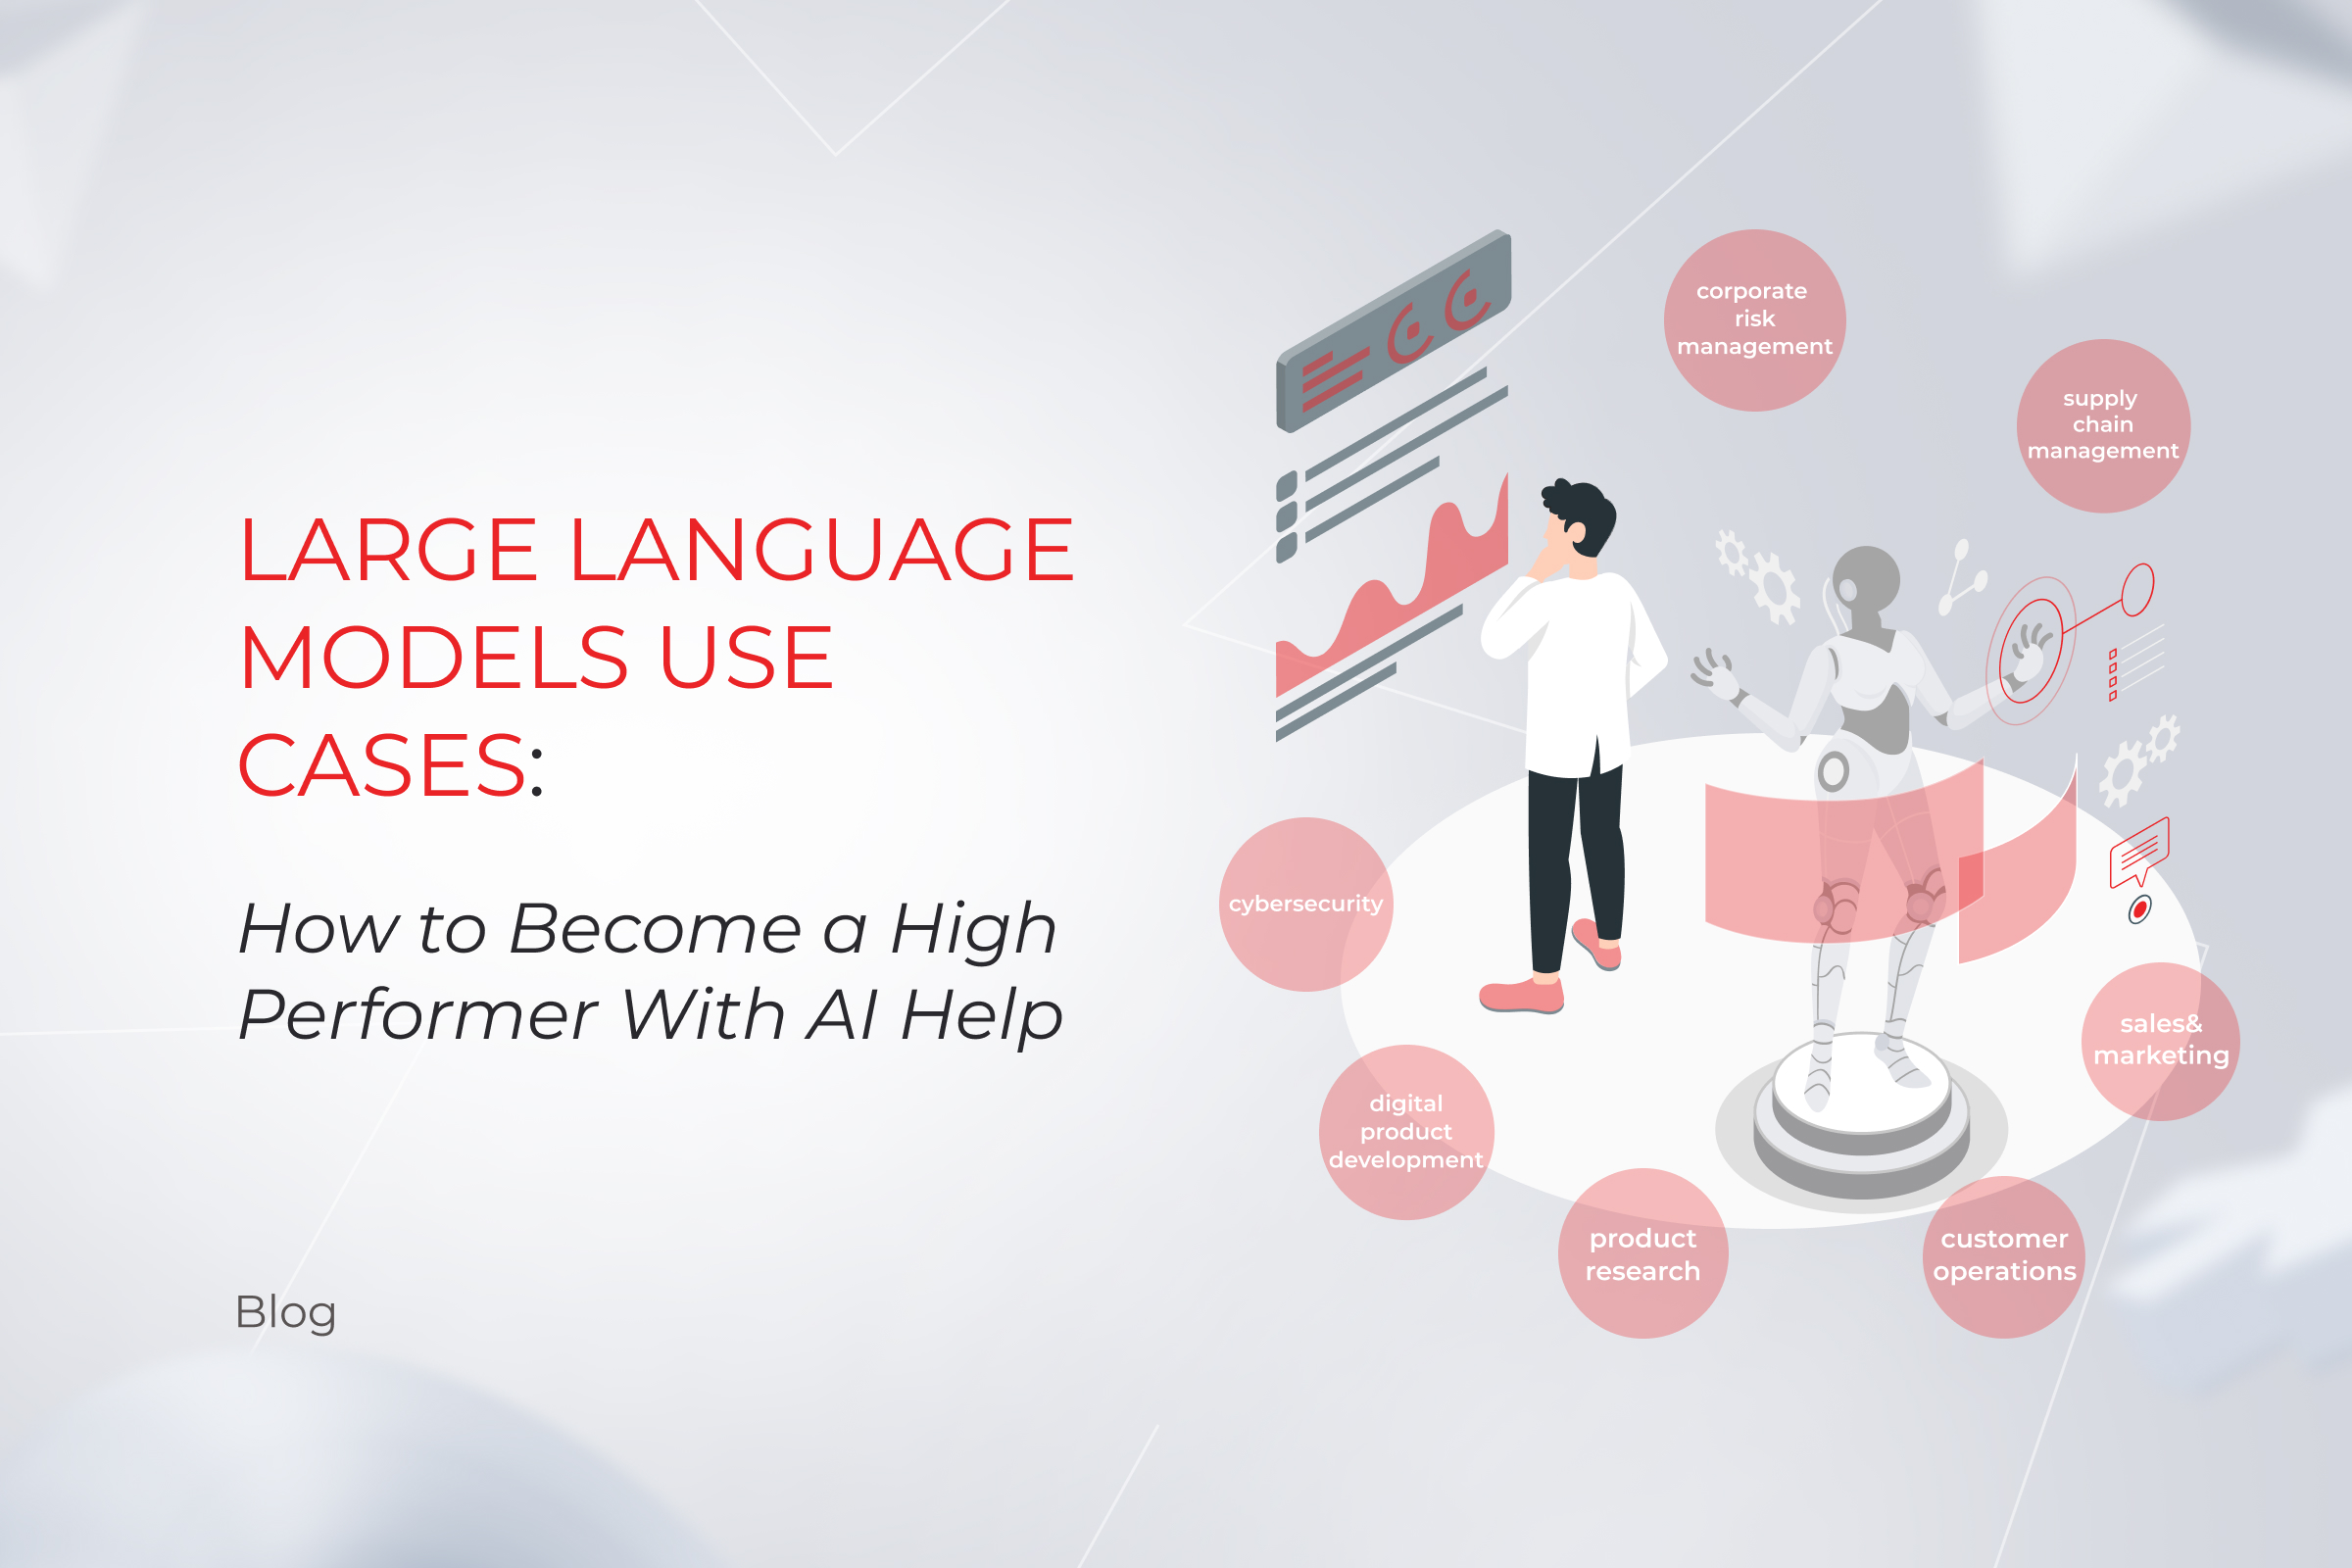 Large Language Models Use Cases: How to Become a High Performer With AI Help